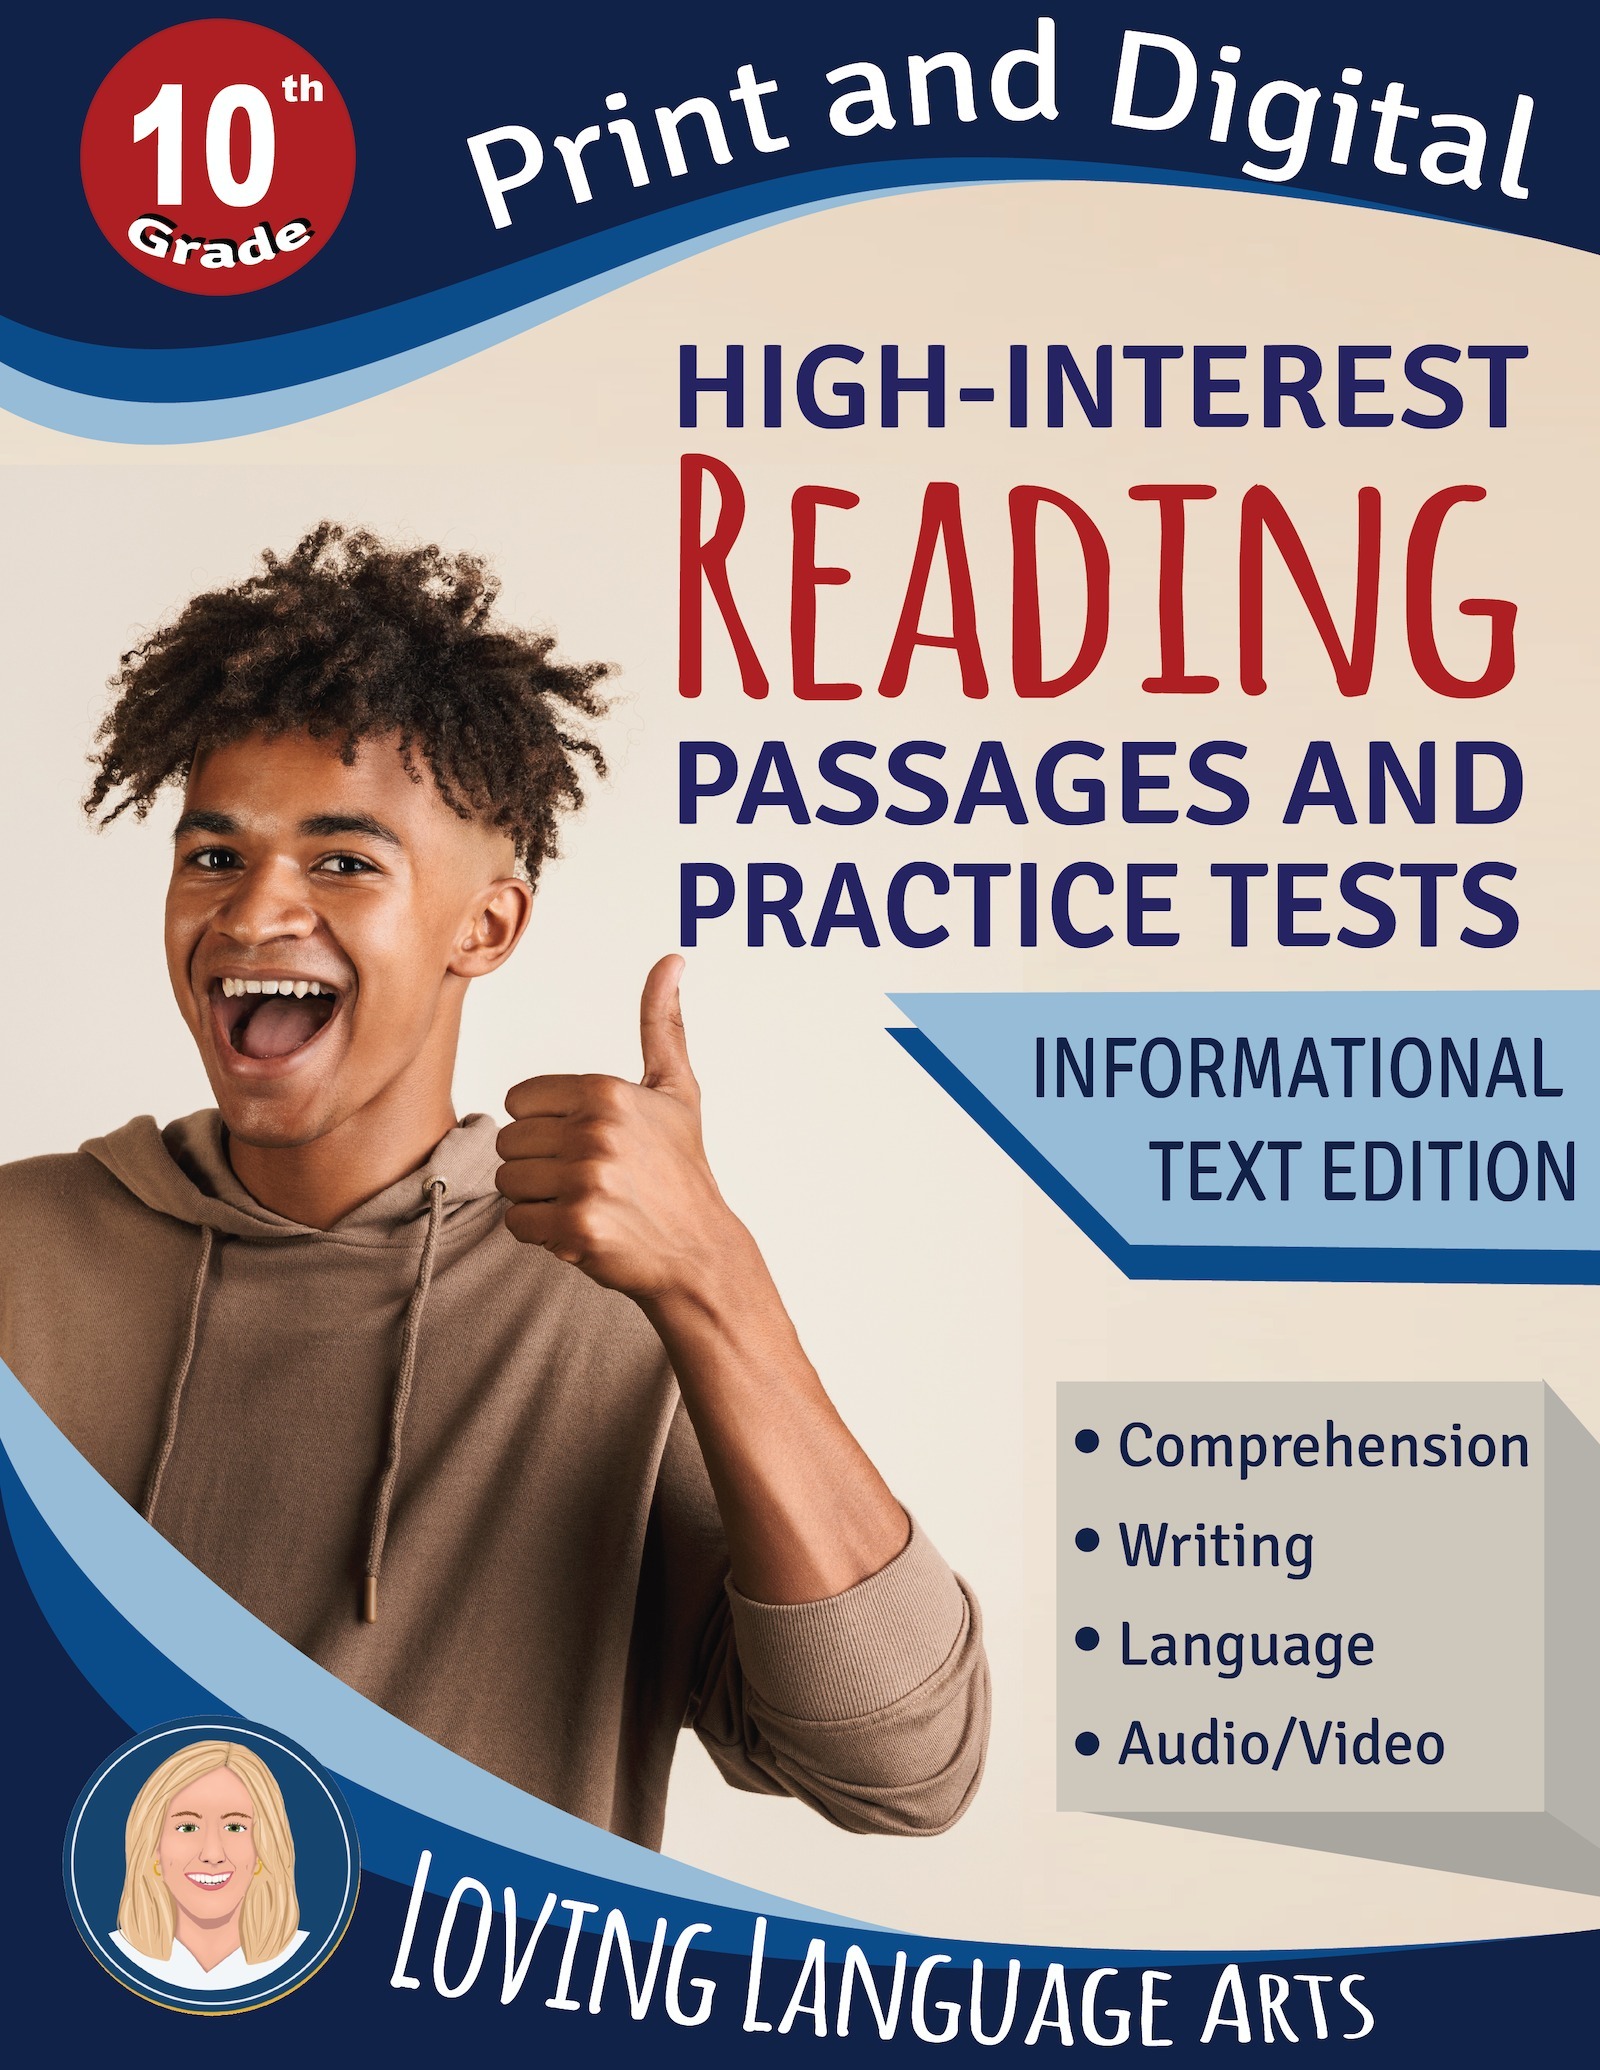 Grade 10 Reading Passages and Practice Tests Workbook - Informational Text Edition